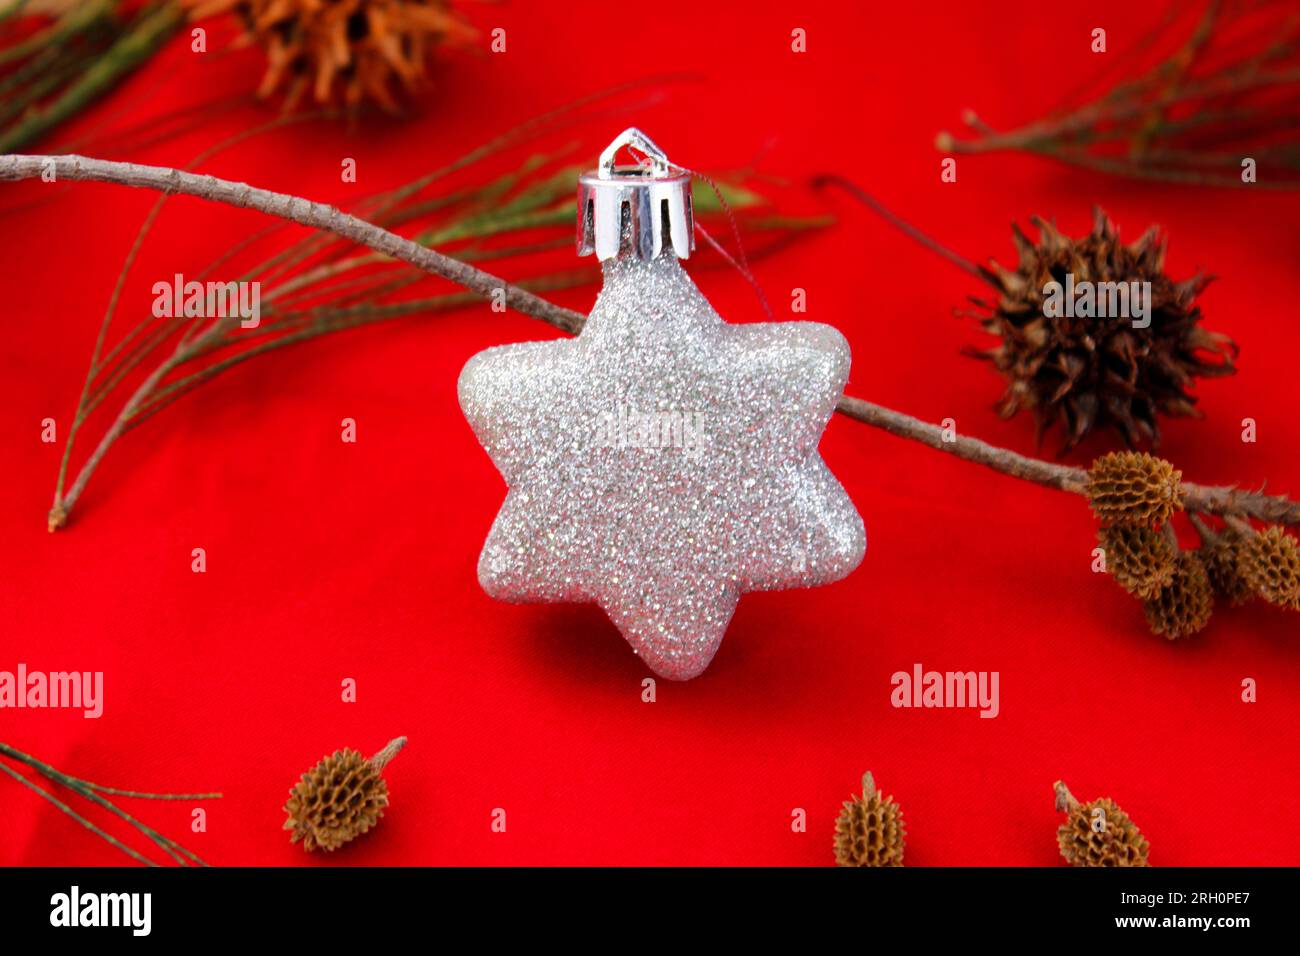 Silver star, christmas decoration with background of dry leaves and pine branches Stock Photo